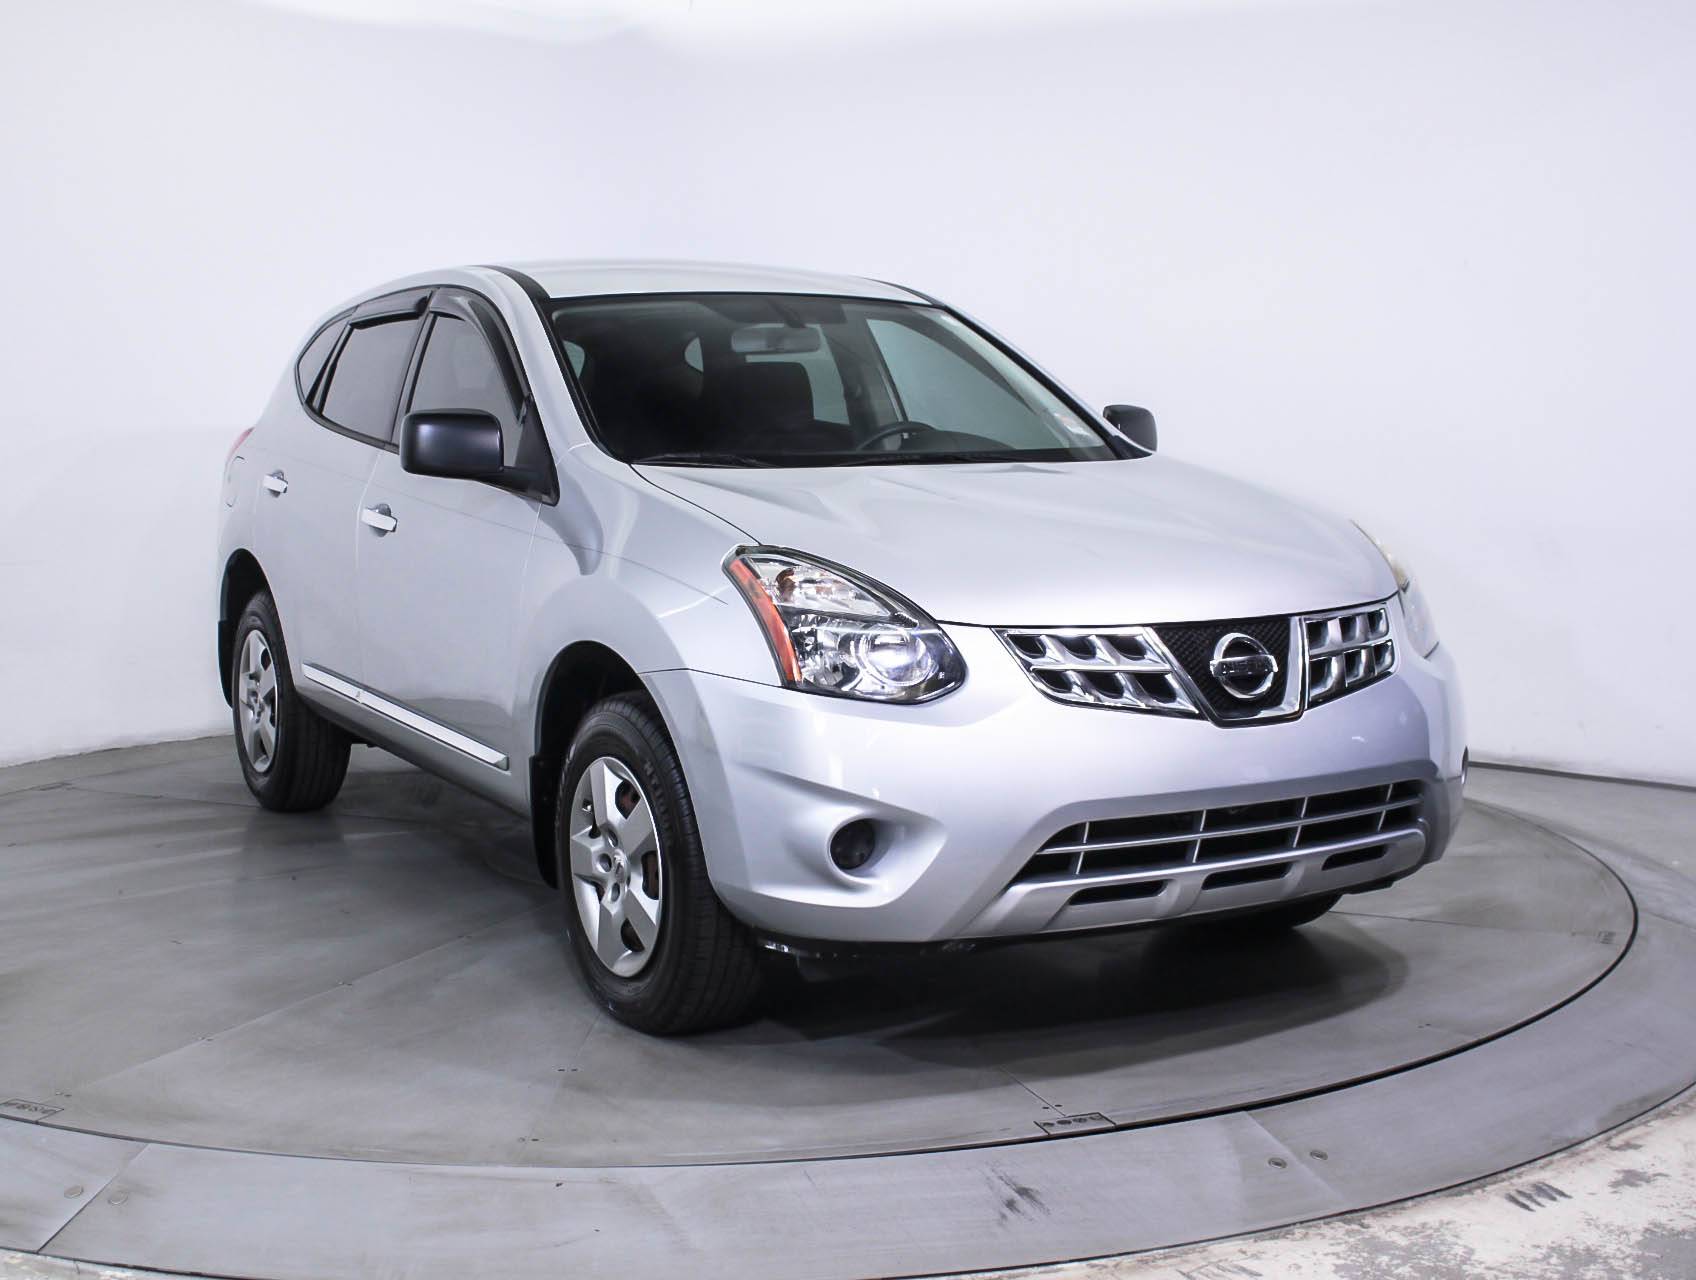 Florida Fine Cars - Used NISSAN ROGUE SELECT 2014 MARGATE S